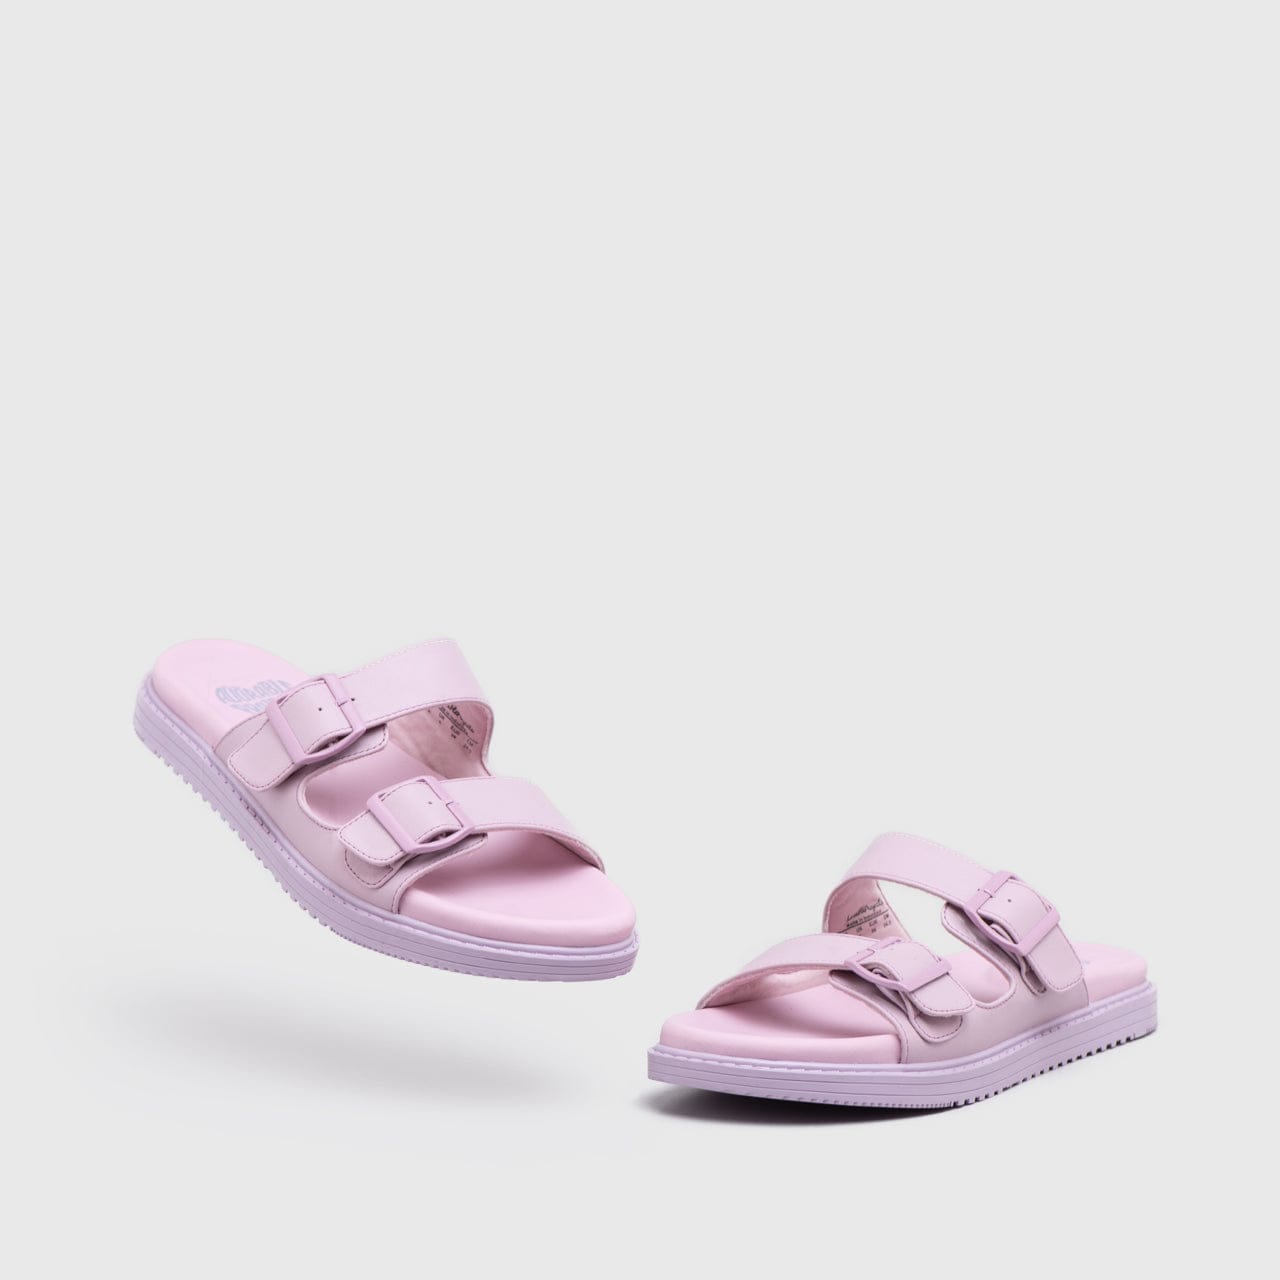 Adorable Projects Official Adorableprojects - Claritaya Sandals Purple - Sendal Wanita